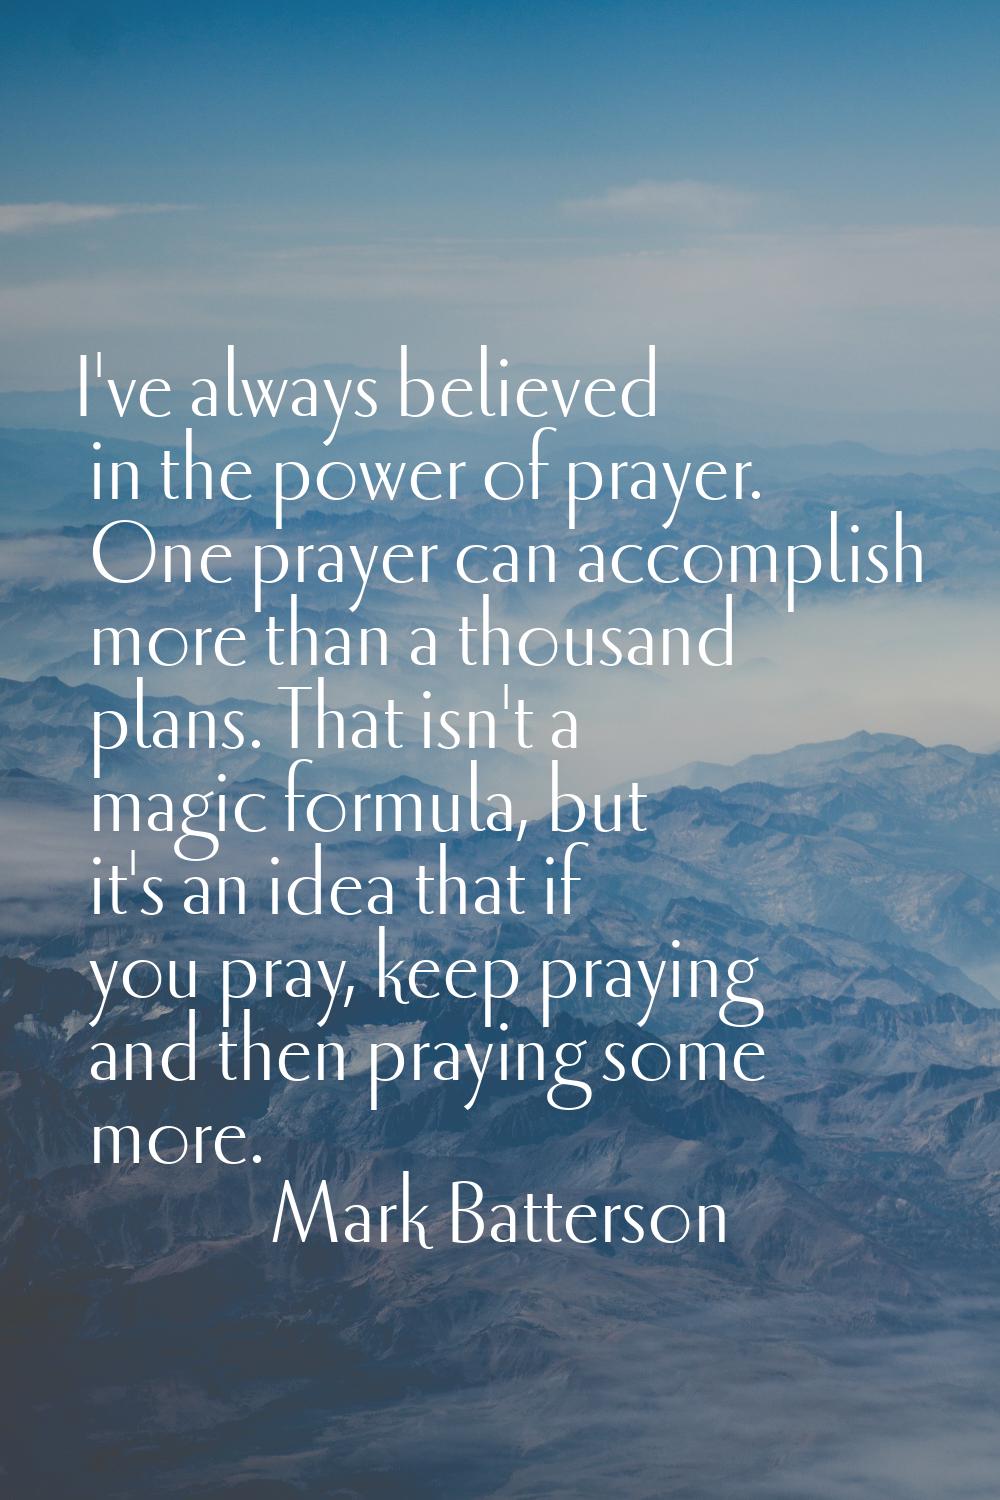 I've always believed in the power of prayer. One prayer can accomplish more than a thousand plans. 